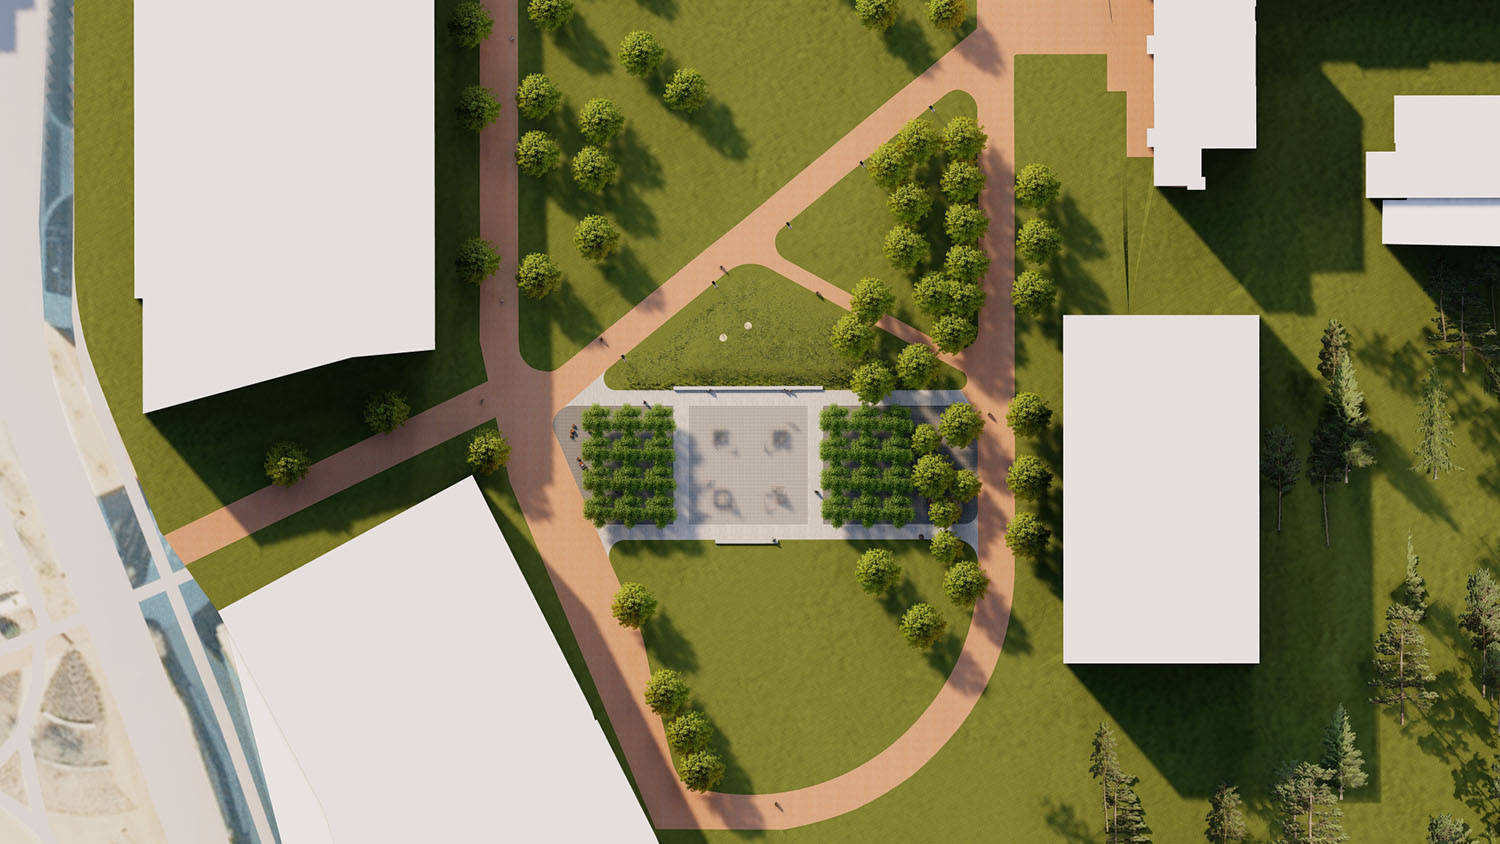 Photo shows a conceptual rendering of a plaza featuring artist Larry Bell's "Reds and Whites" installation slated for Centennial Campus, featuring red and white sculptural blocks between two bosques of trees.